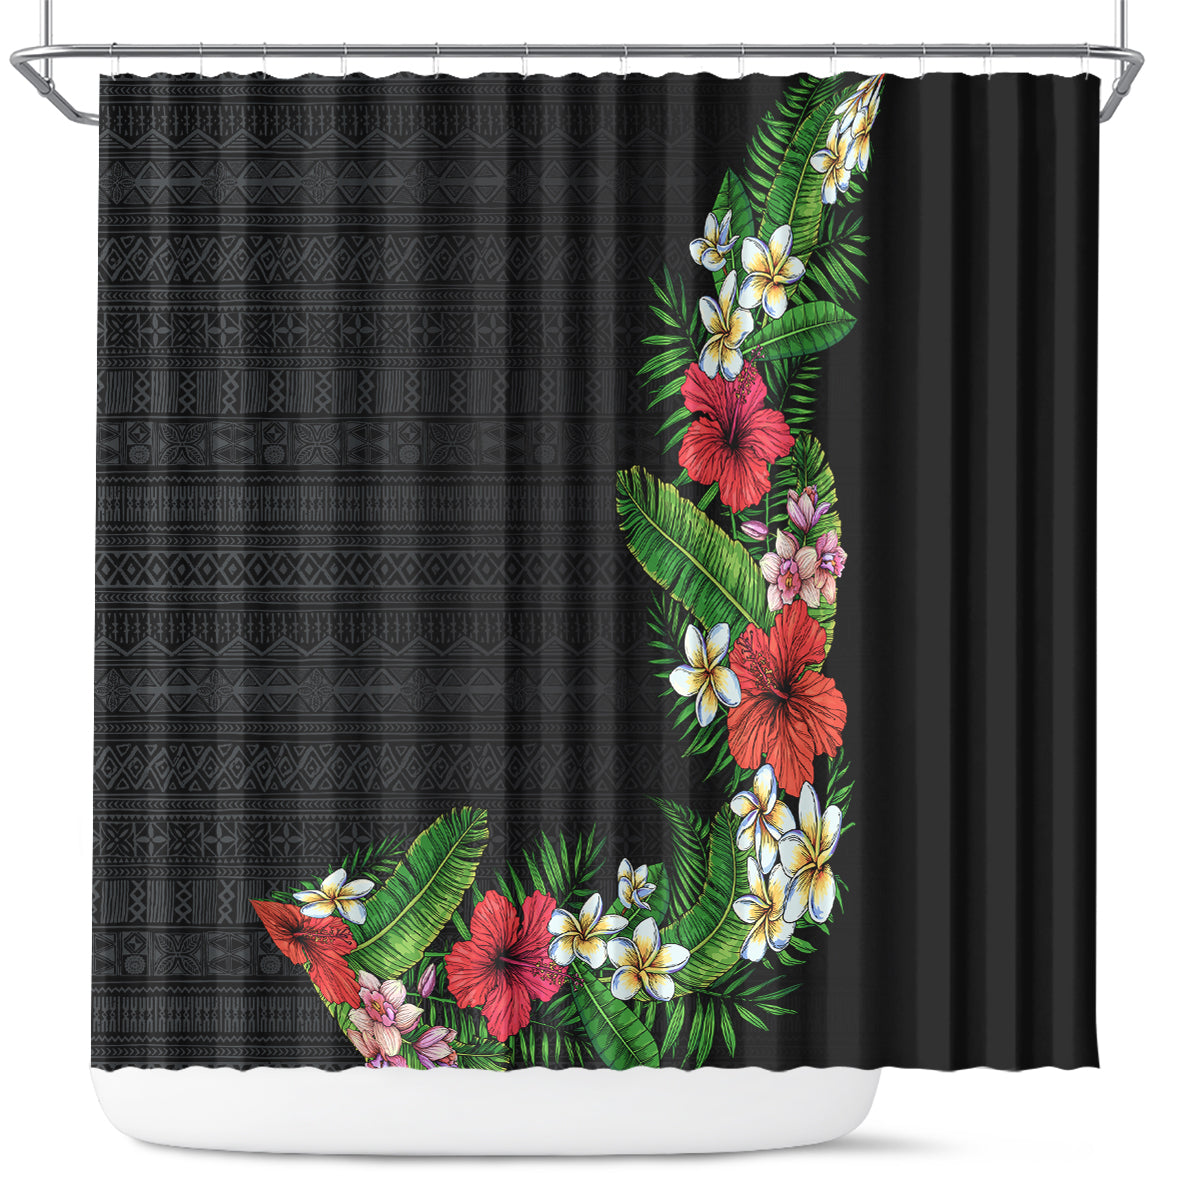 Hawaii Tropical Flowers and Leaves Shower Curtain Tapa Pattern Colorful Mode